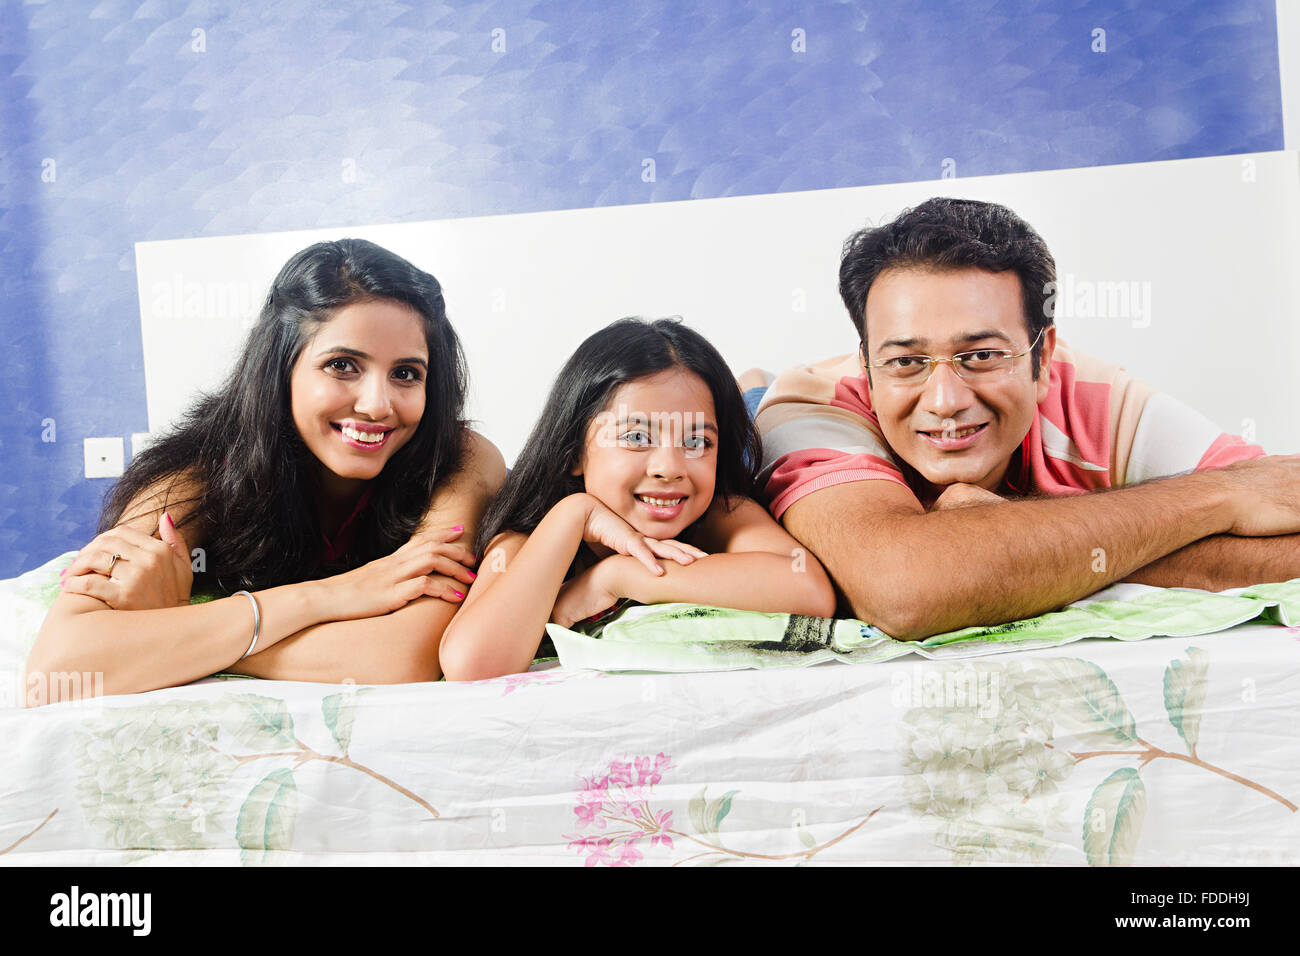 3 People Parents and Kid Daughter Bedroom Lying Down Relaxation Stock Photo